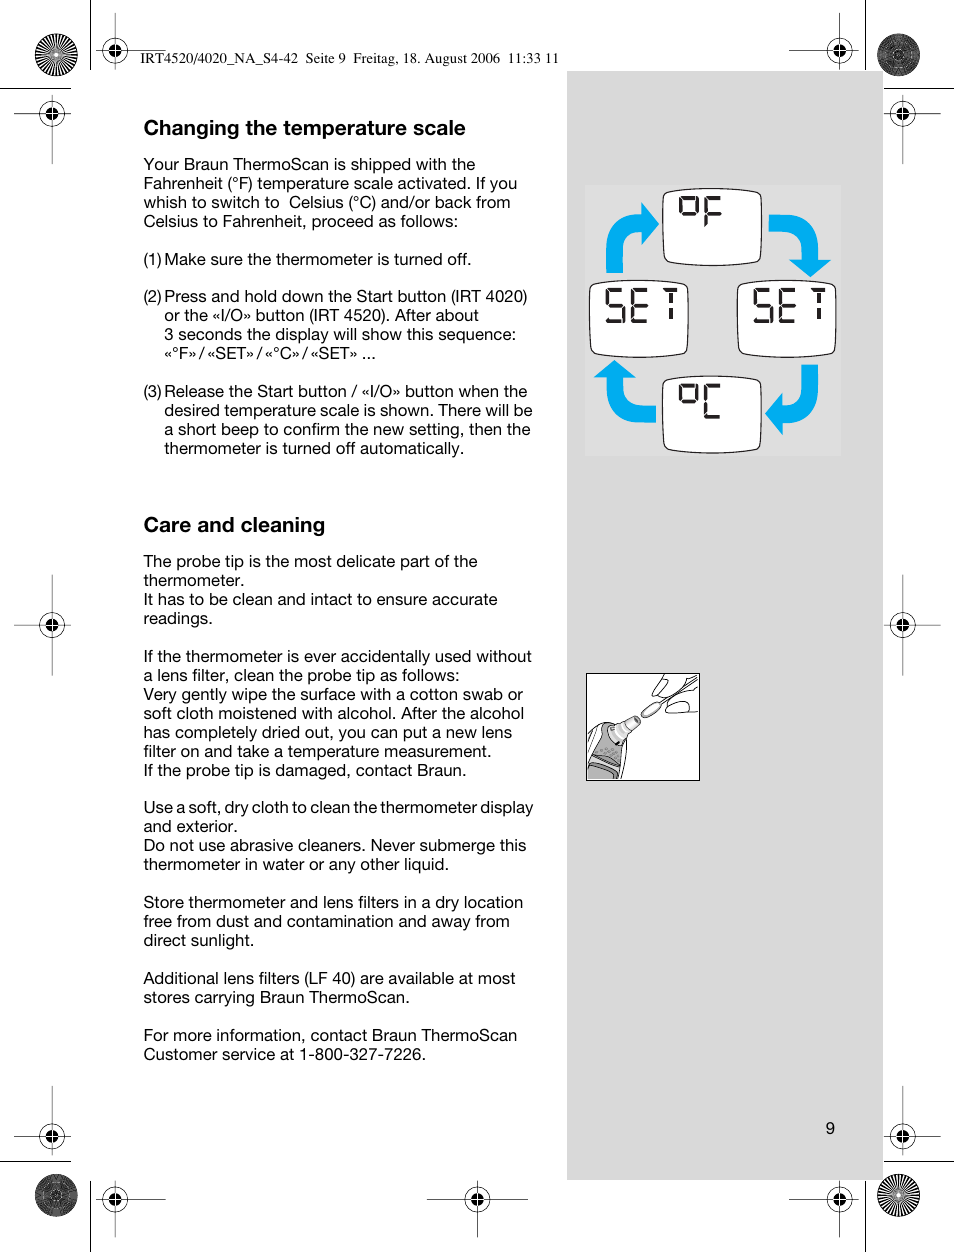 Changing the temperature scale, Care and cleaning | Braun ThermoScan IRT  4520 User Manual | Page 9 / 42